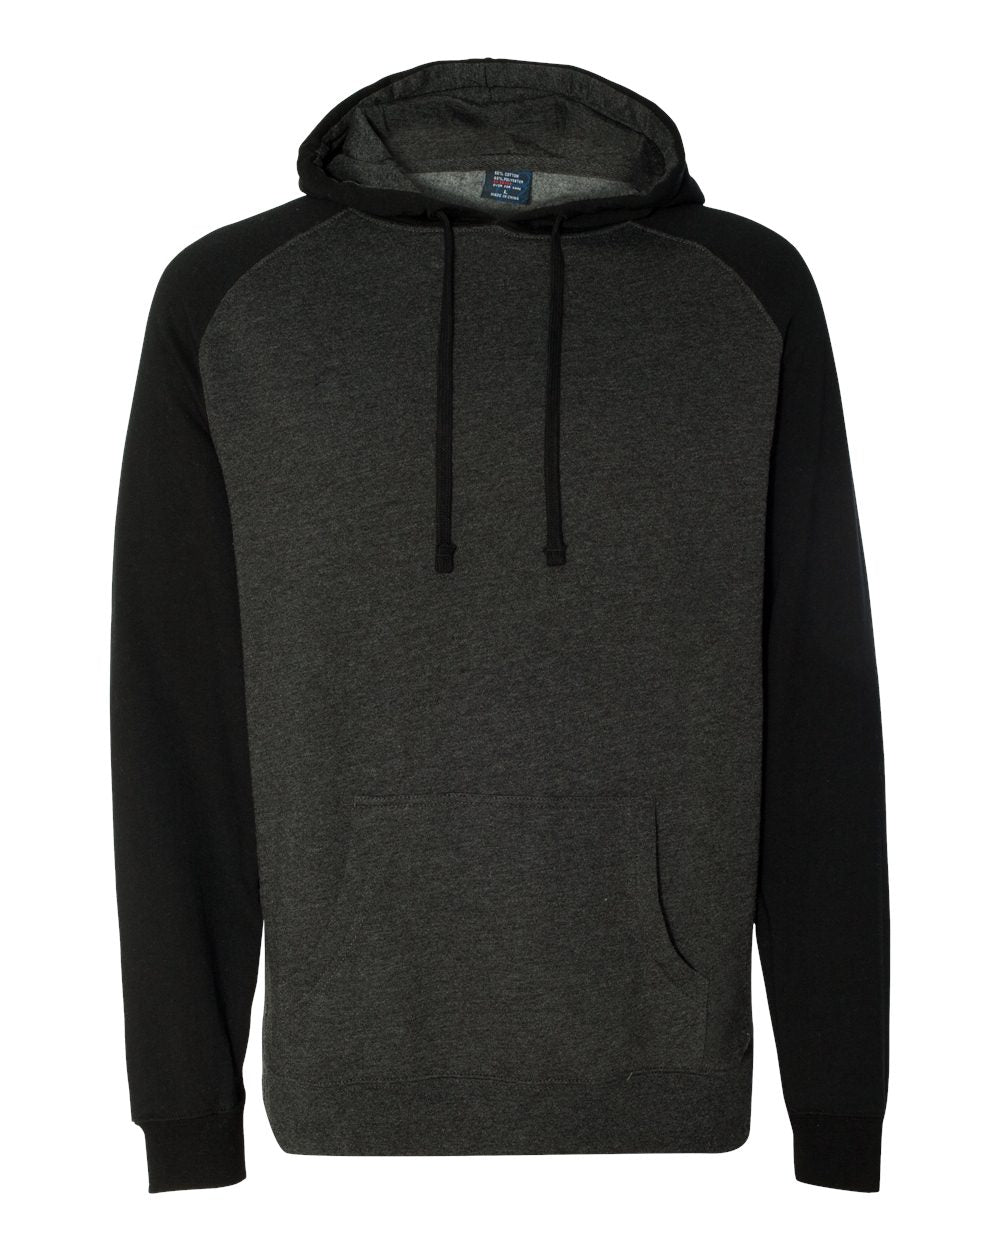 Independent Trading Co. Raglan Hooded Sweatshirt IND40RP #color_Charcoal Heather/ Black